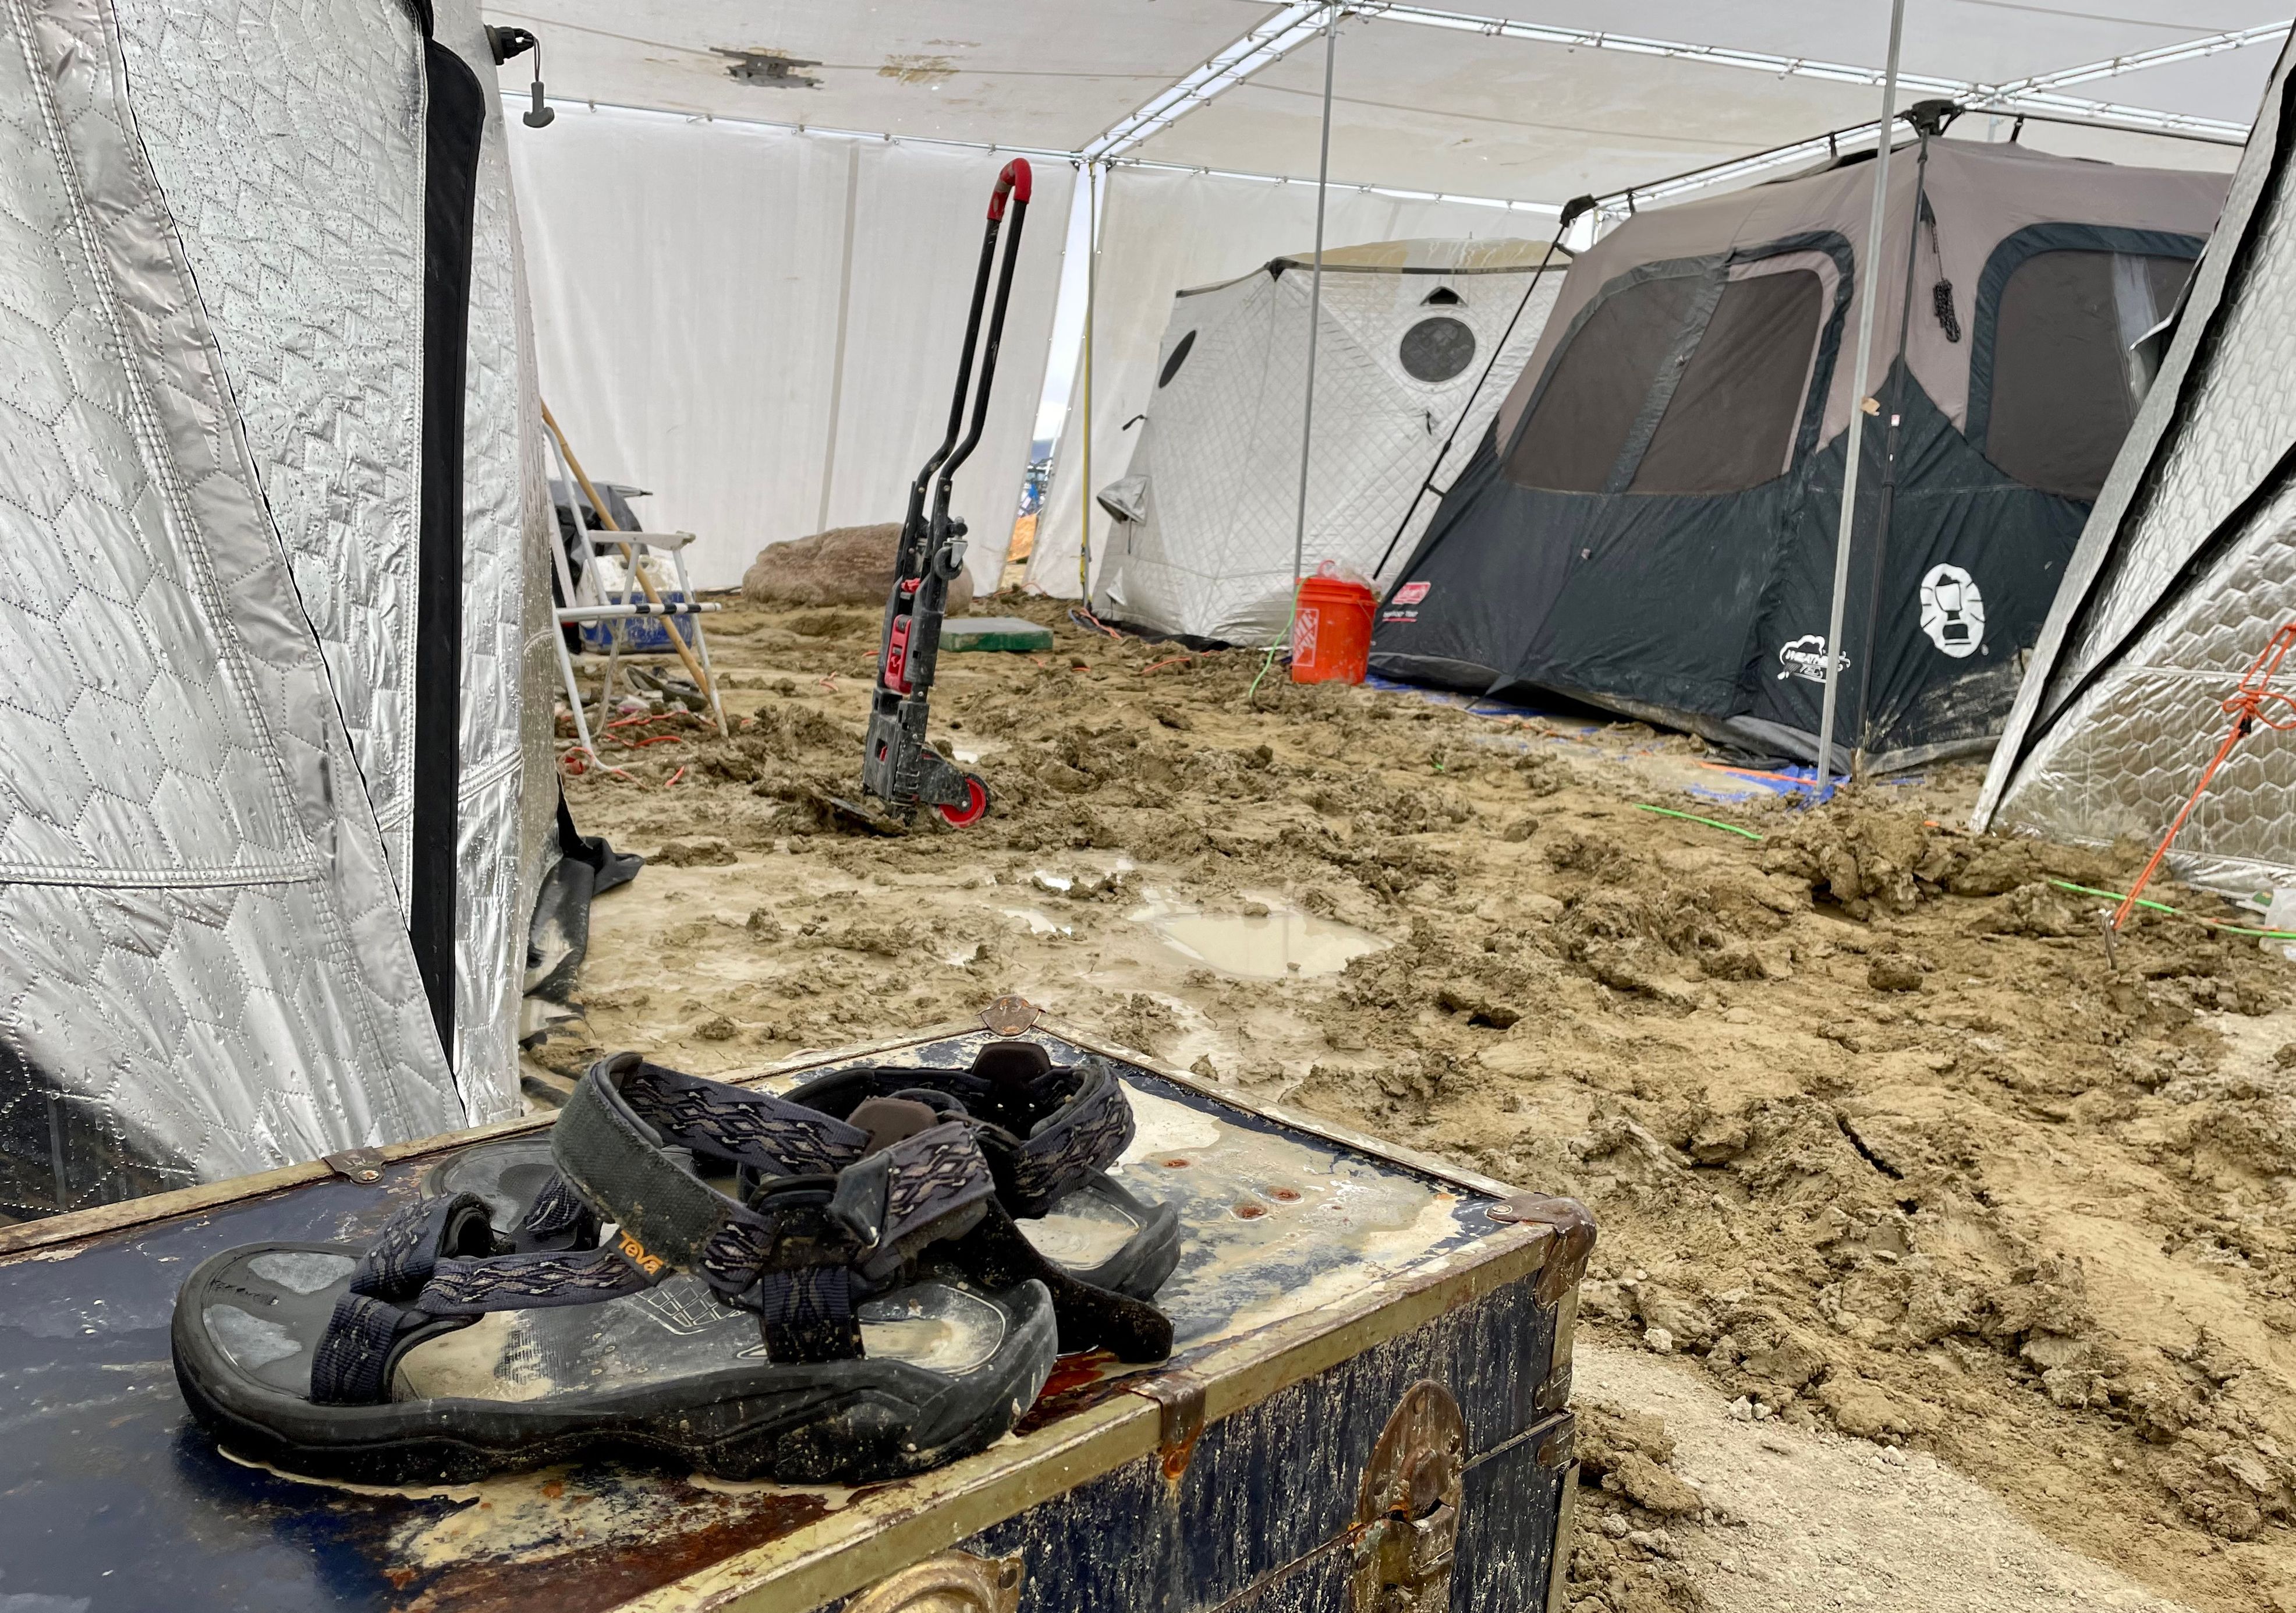 Burning Man Punters Stuck In The Mud (Literally) As Unexpected Storms